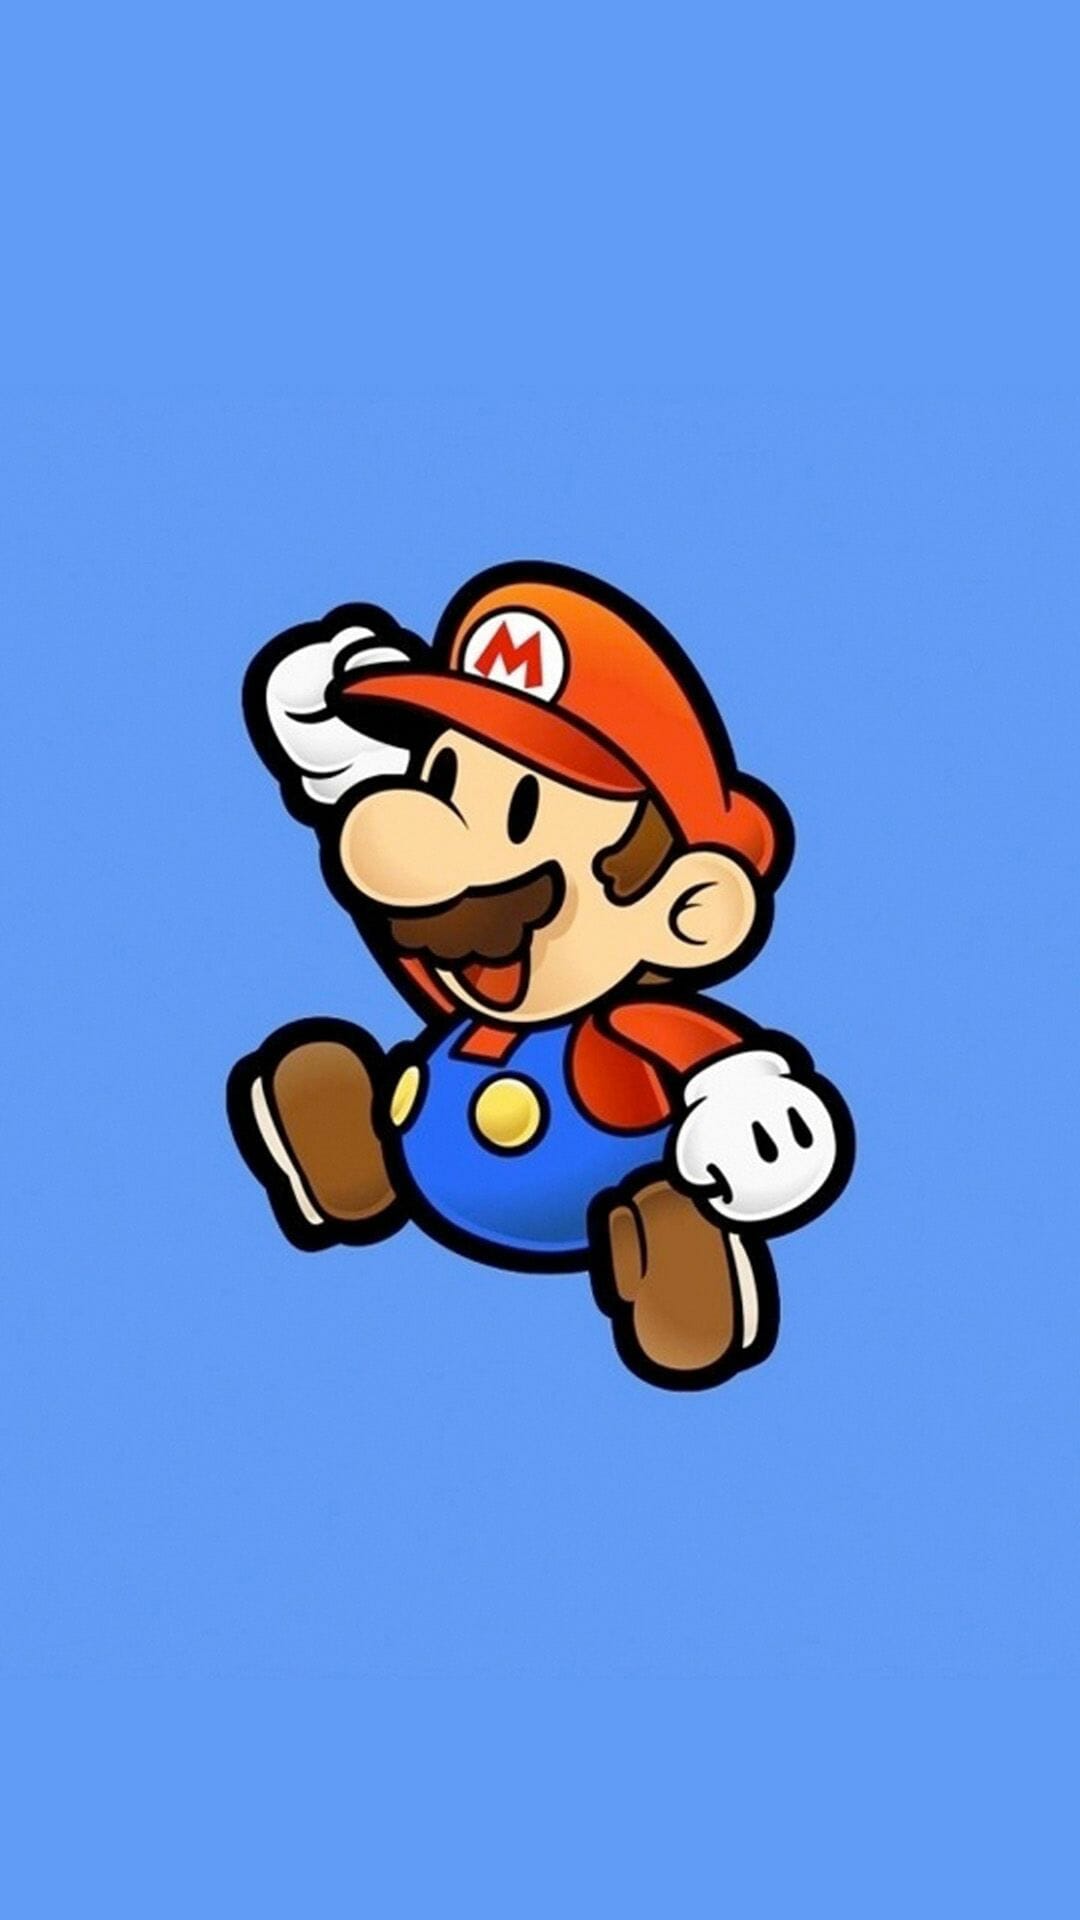 Super Mario wallpaper for iPhone / iPhone HD Wallpaper Background Download (png / jpg) (2022)